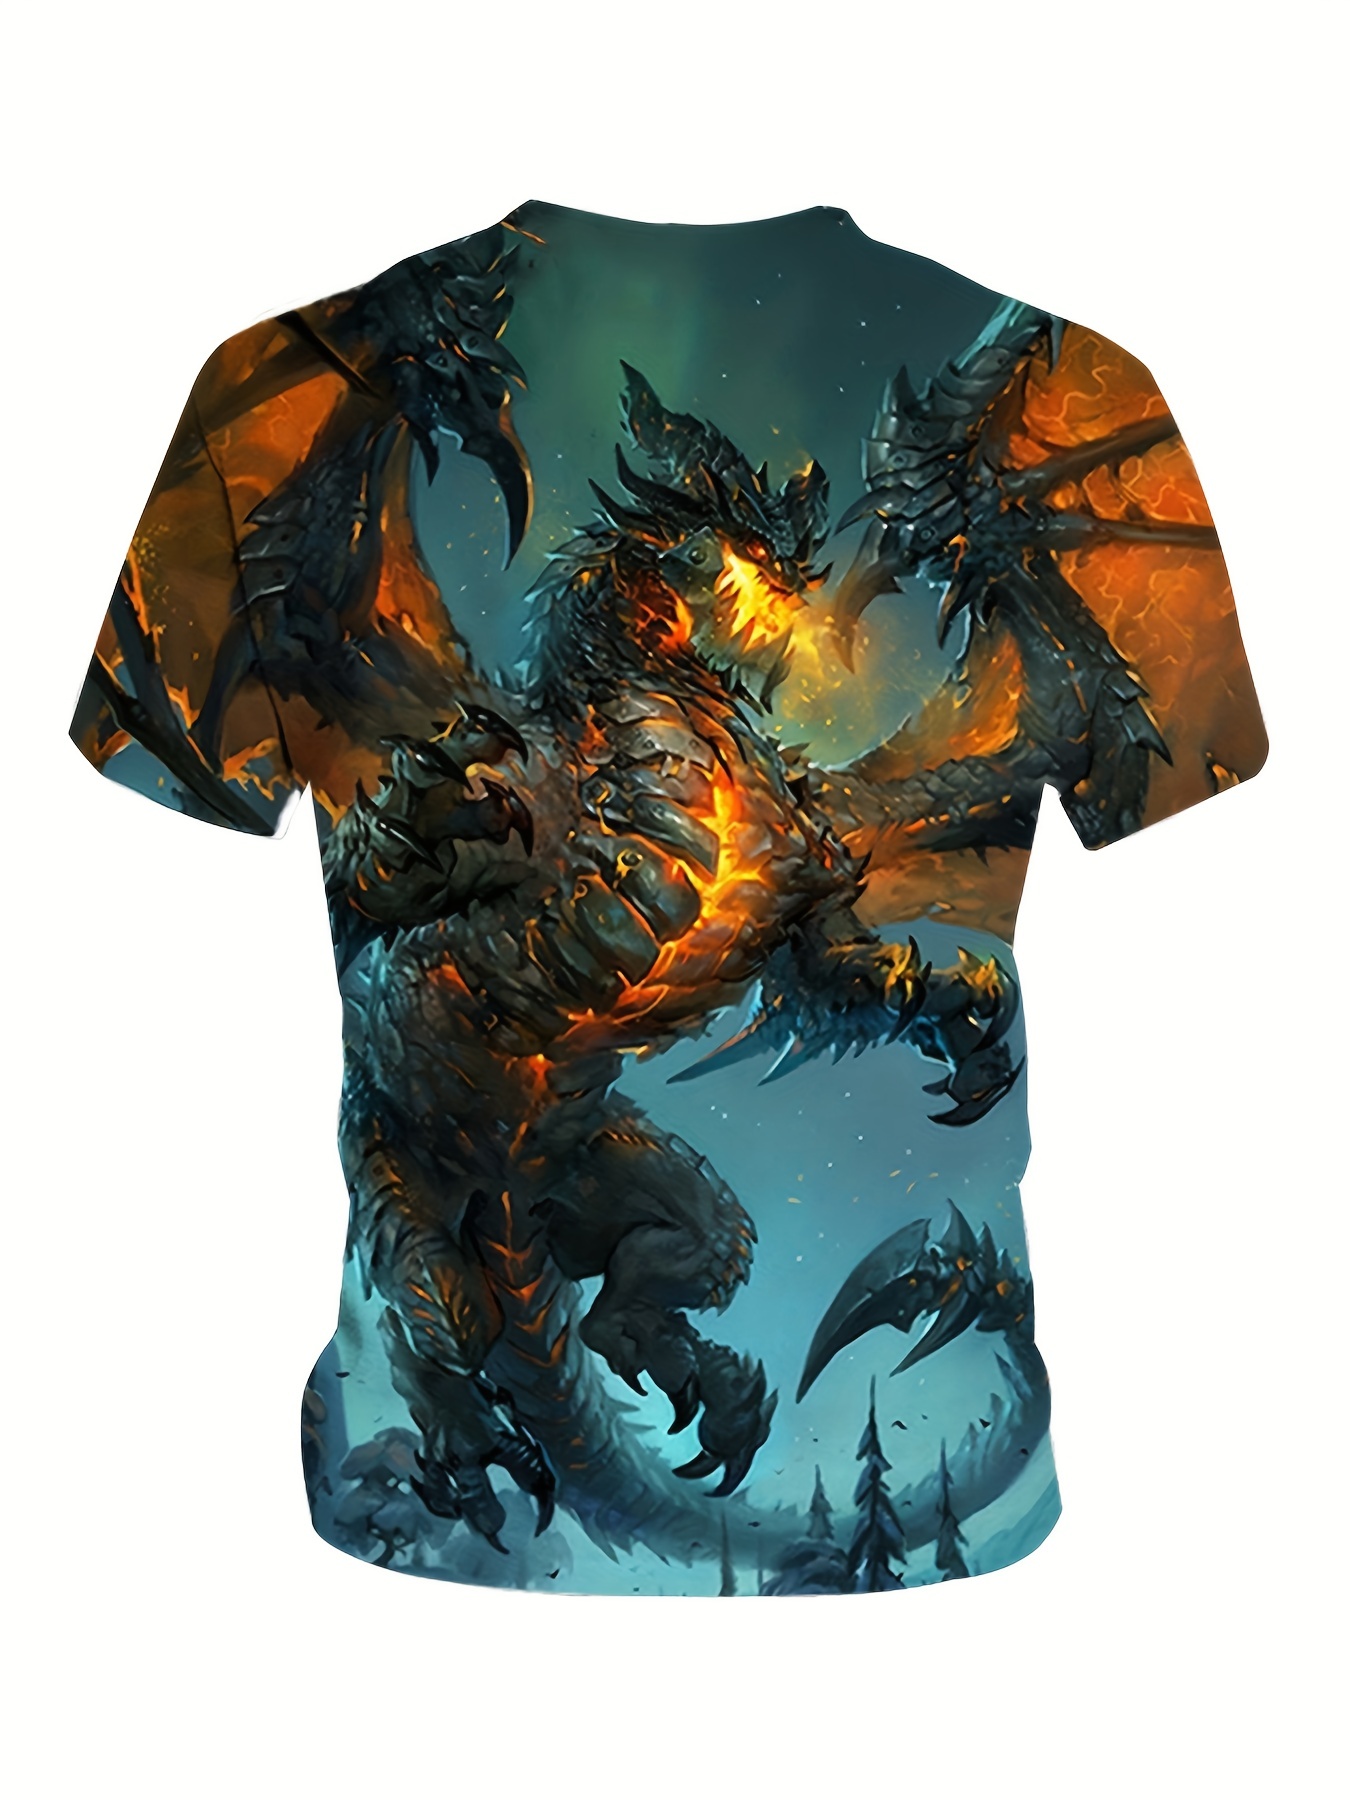 Cool Dragon 3D Print Boys Creative T-shirt, Casual Lightweight Comfy Short  Sleeve Tee Tops, Kids Clothings For Summer